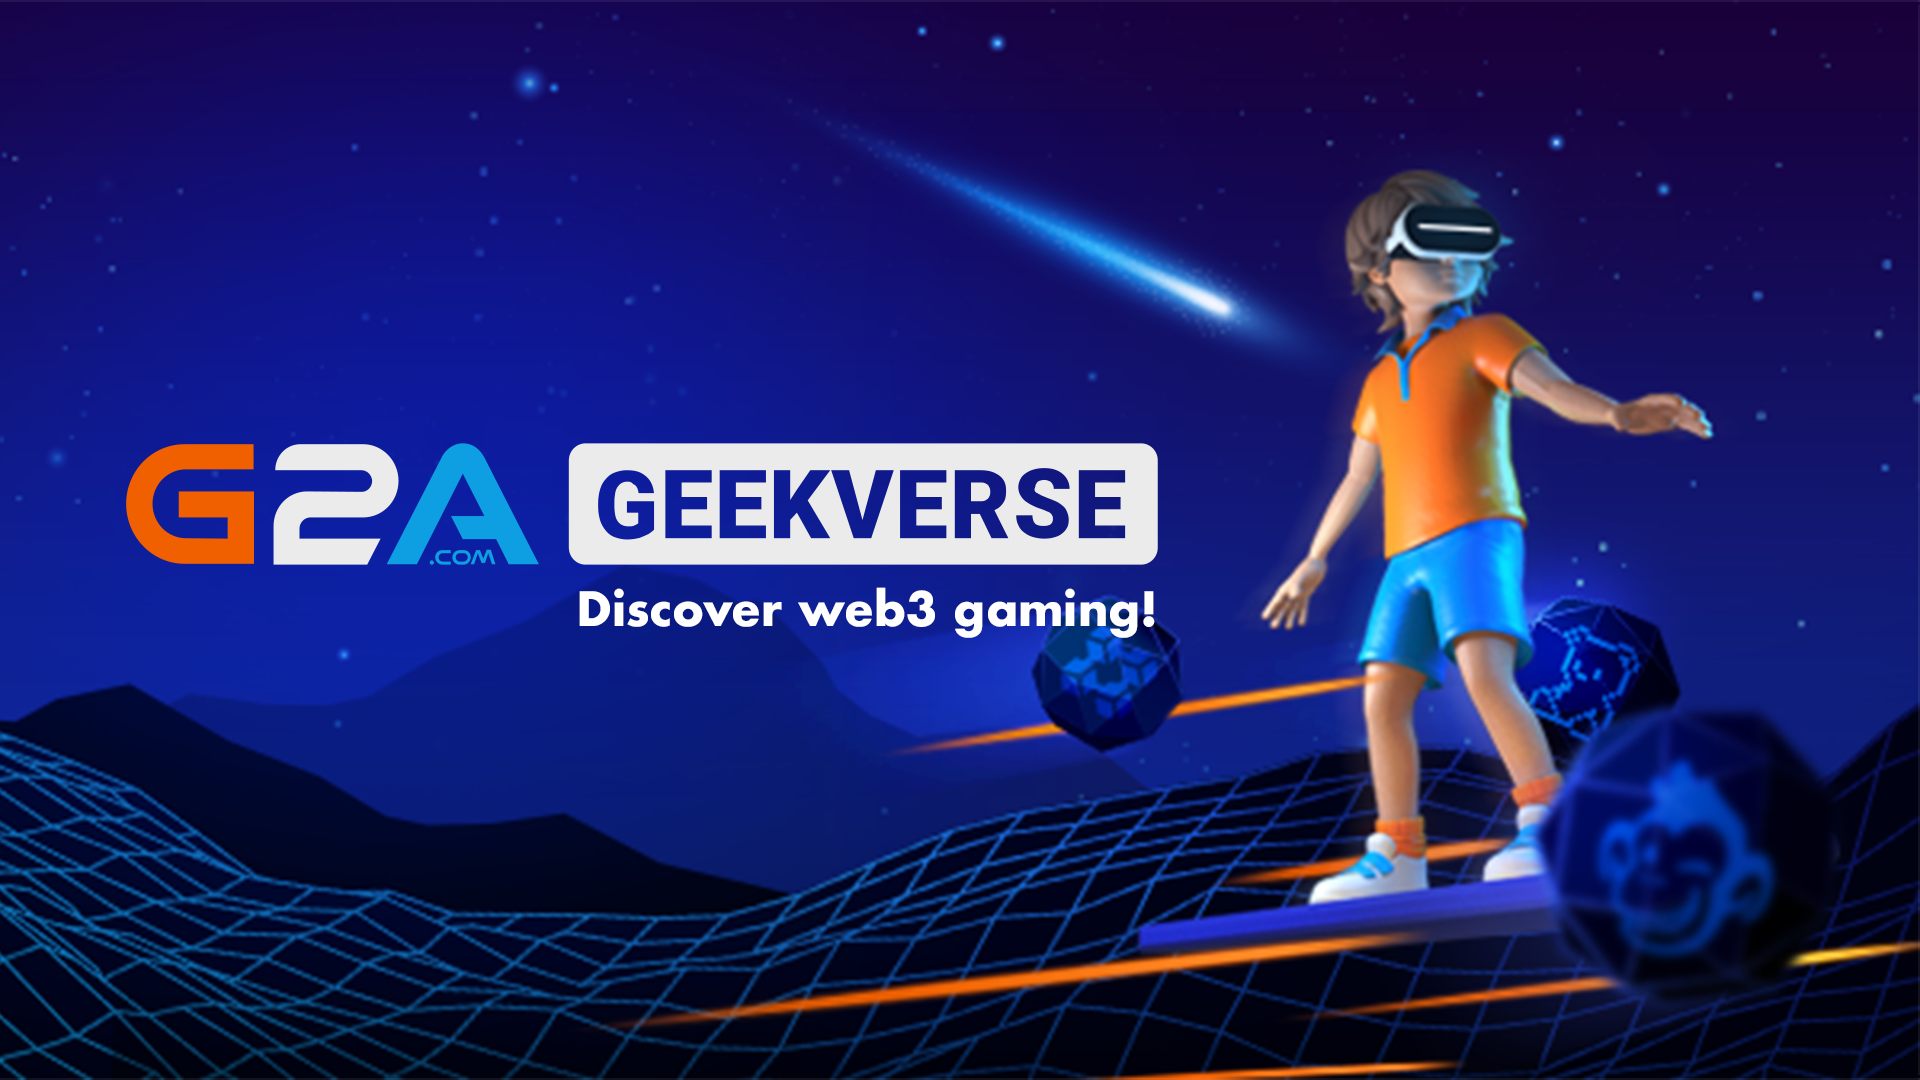 G2A.COM opens the gate to Web3: introducing G2A Geekverse, a cutting edge Web3 gaming marketplace